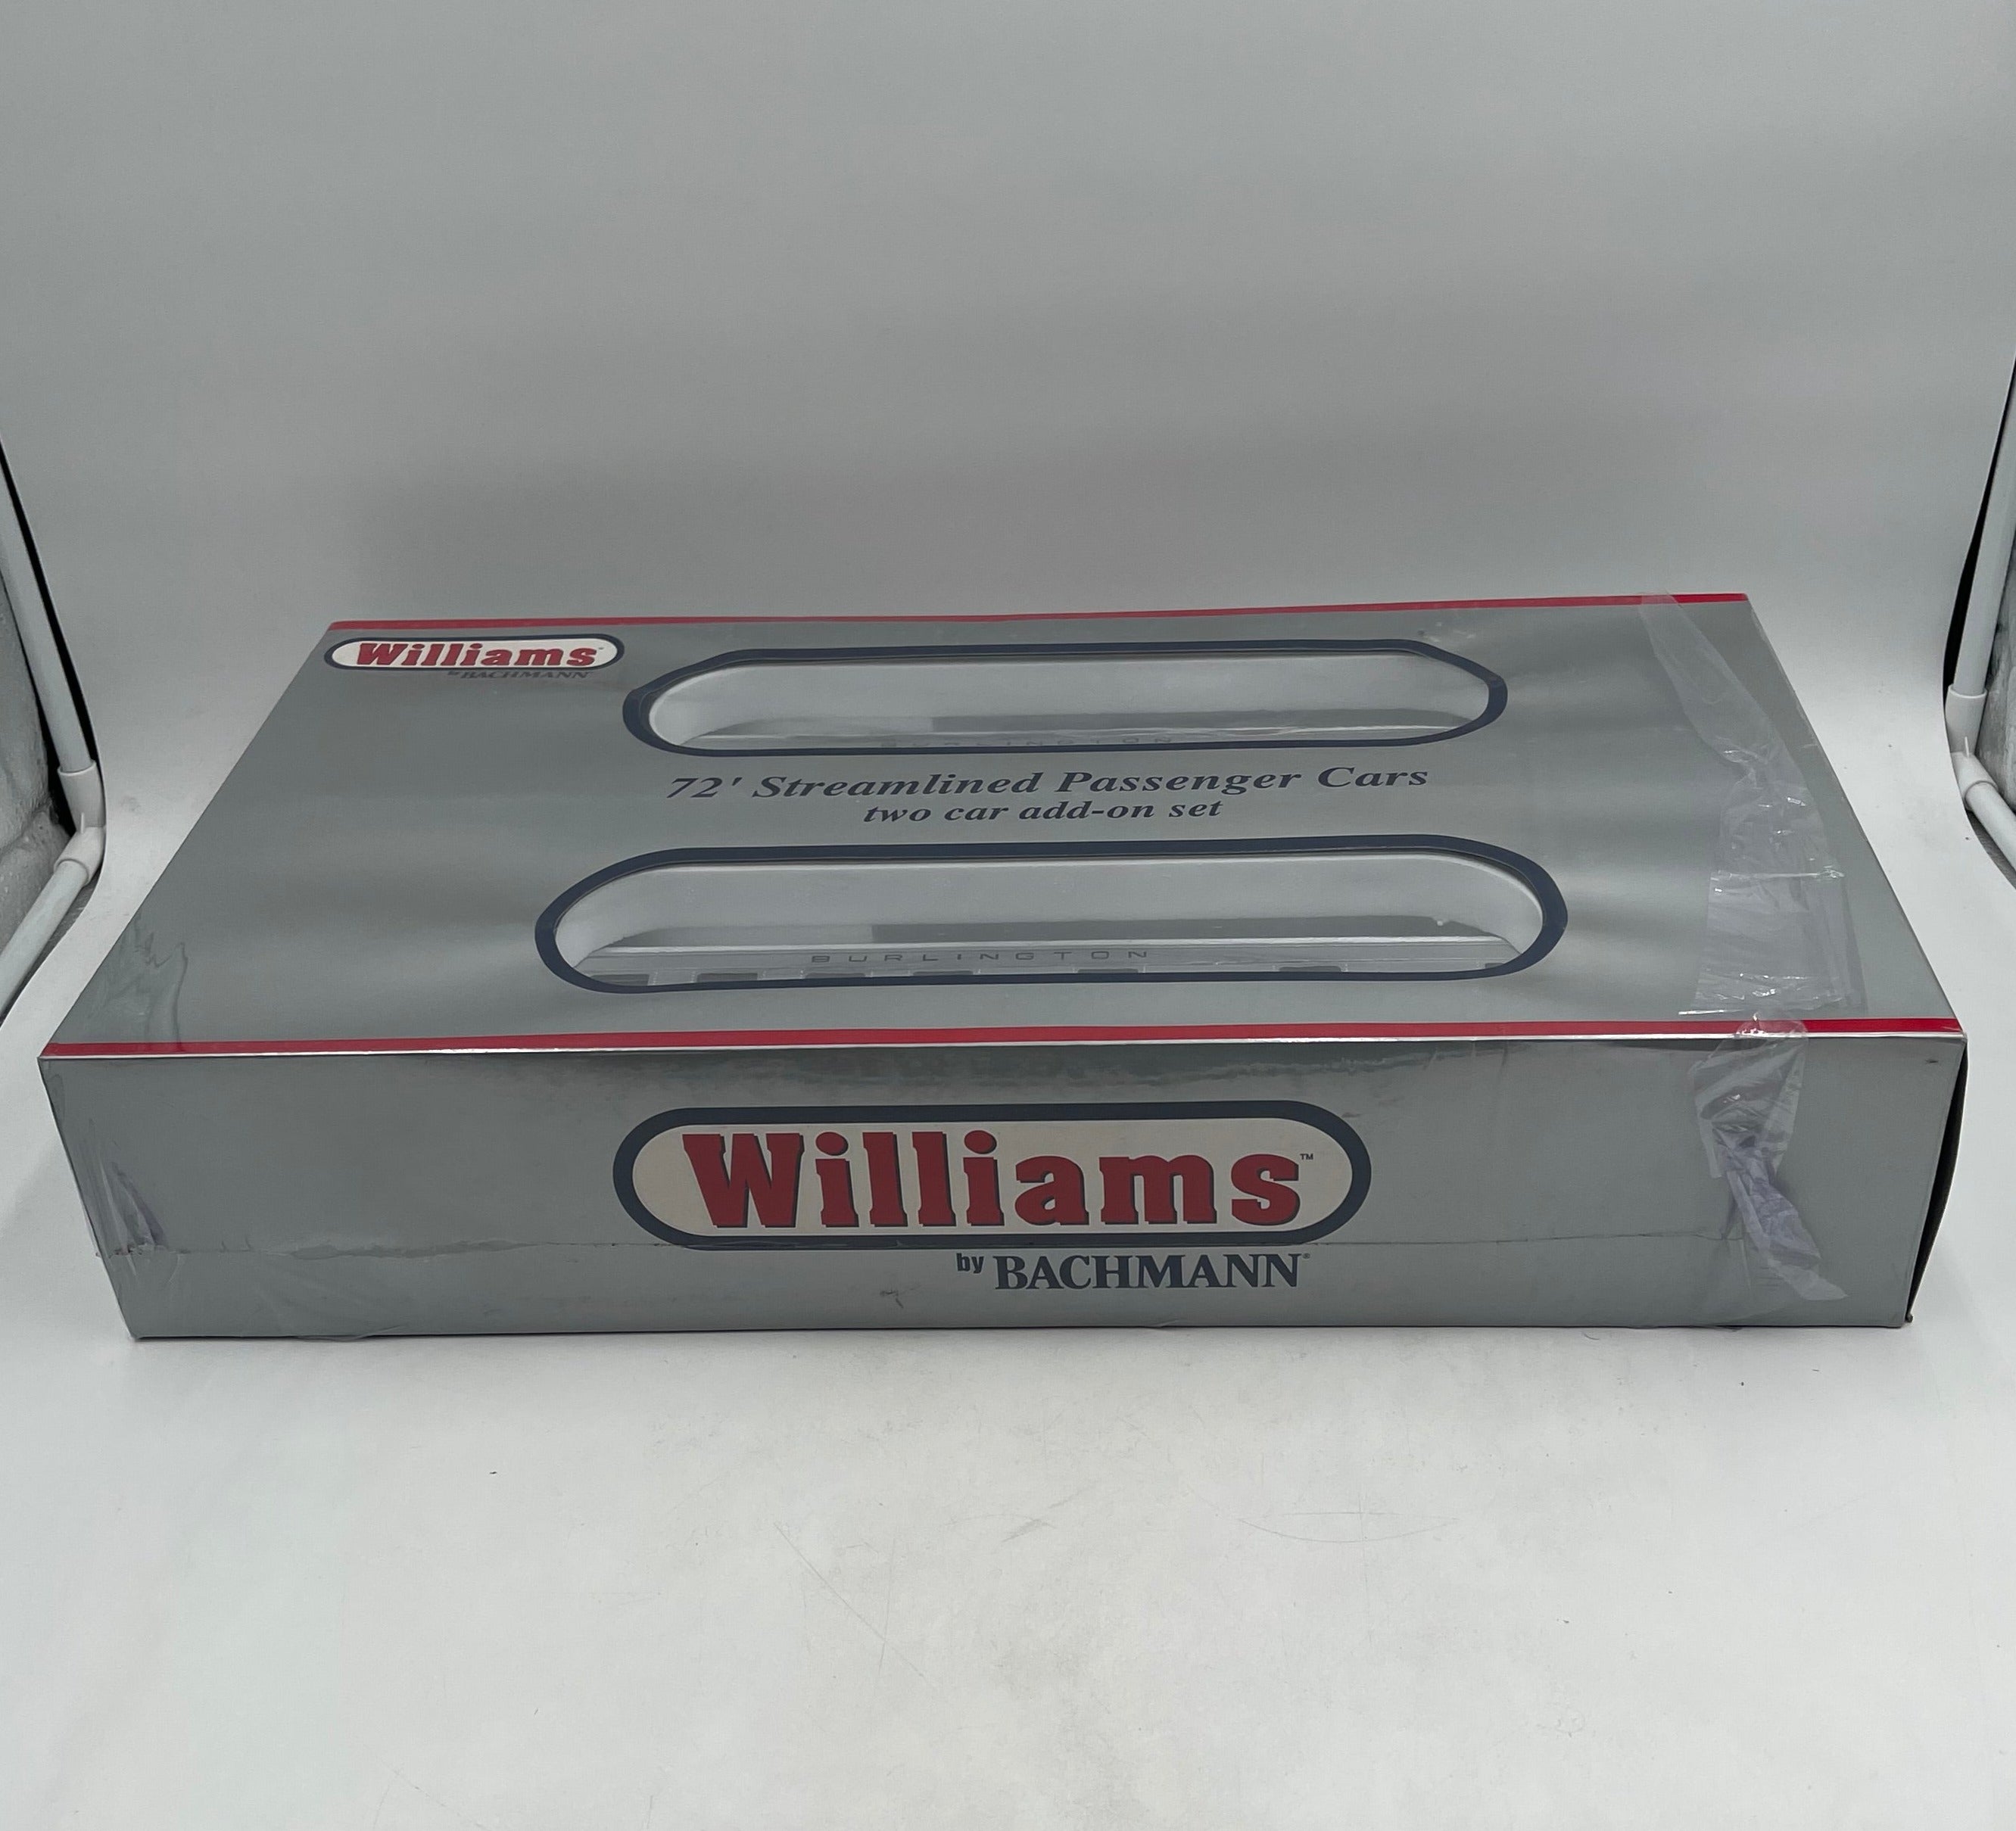 Williams by Bachmann 72' Streamlined Passenger Cars Two Car Add-On Set - 43104